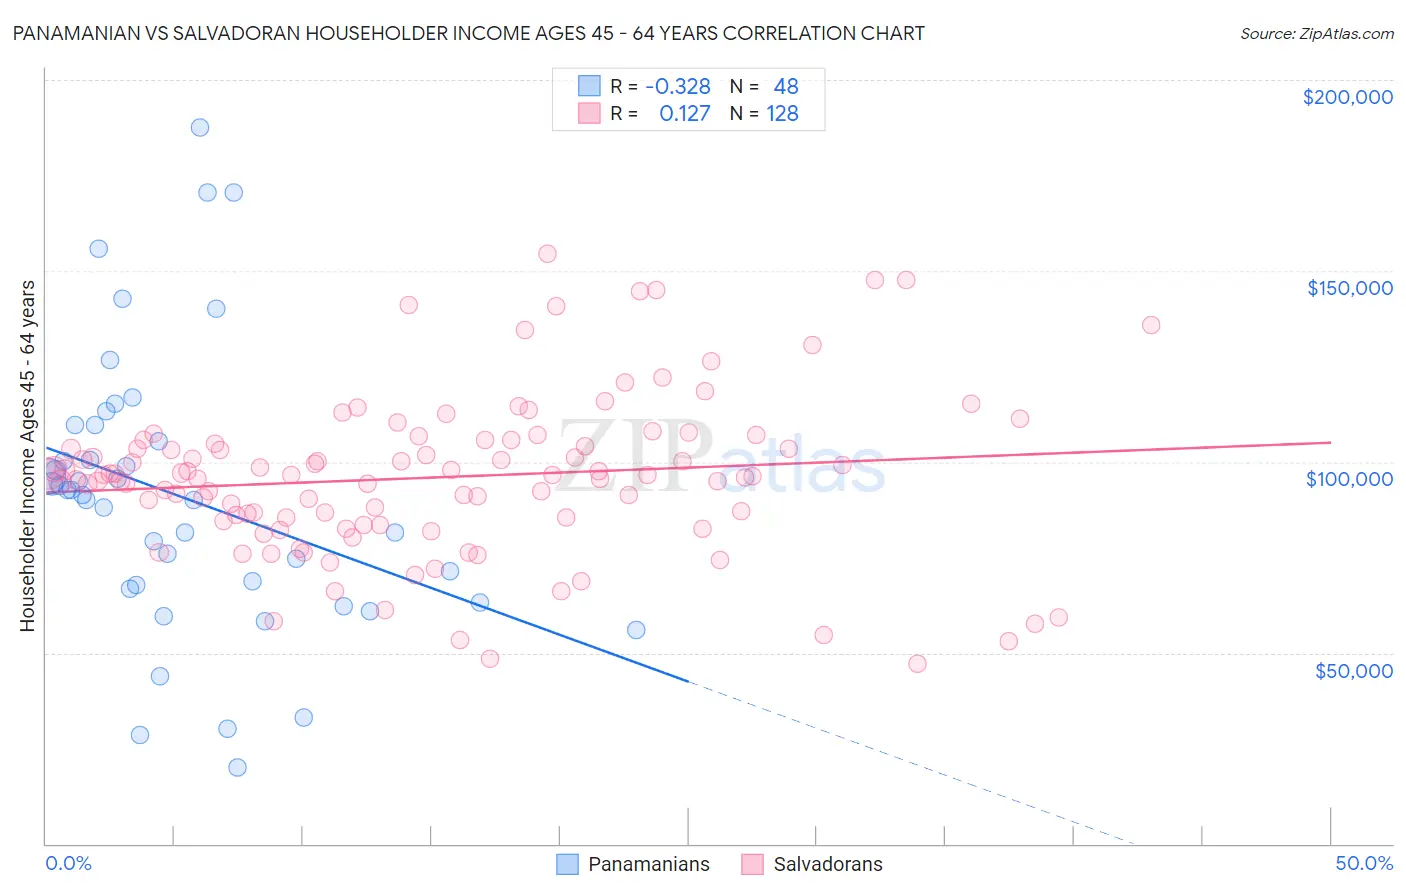 Panamanian vs Salvadoran Householder Income Ages 45 - 64 years